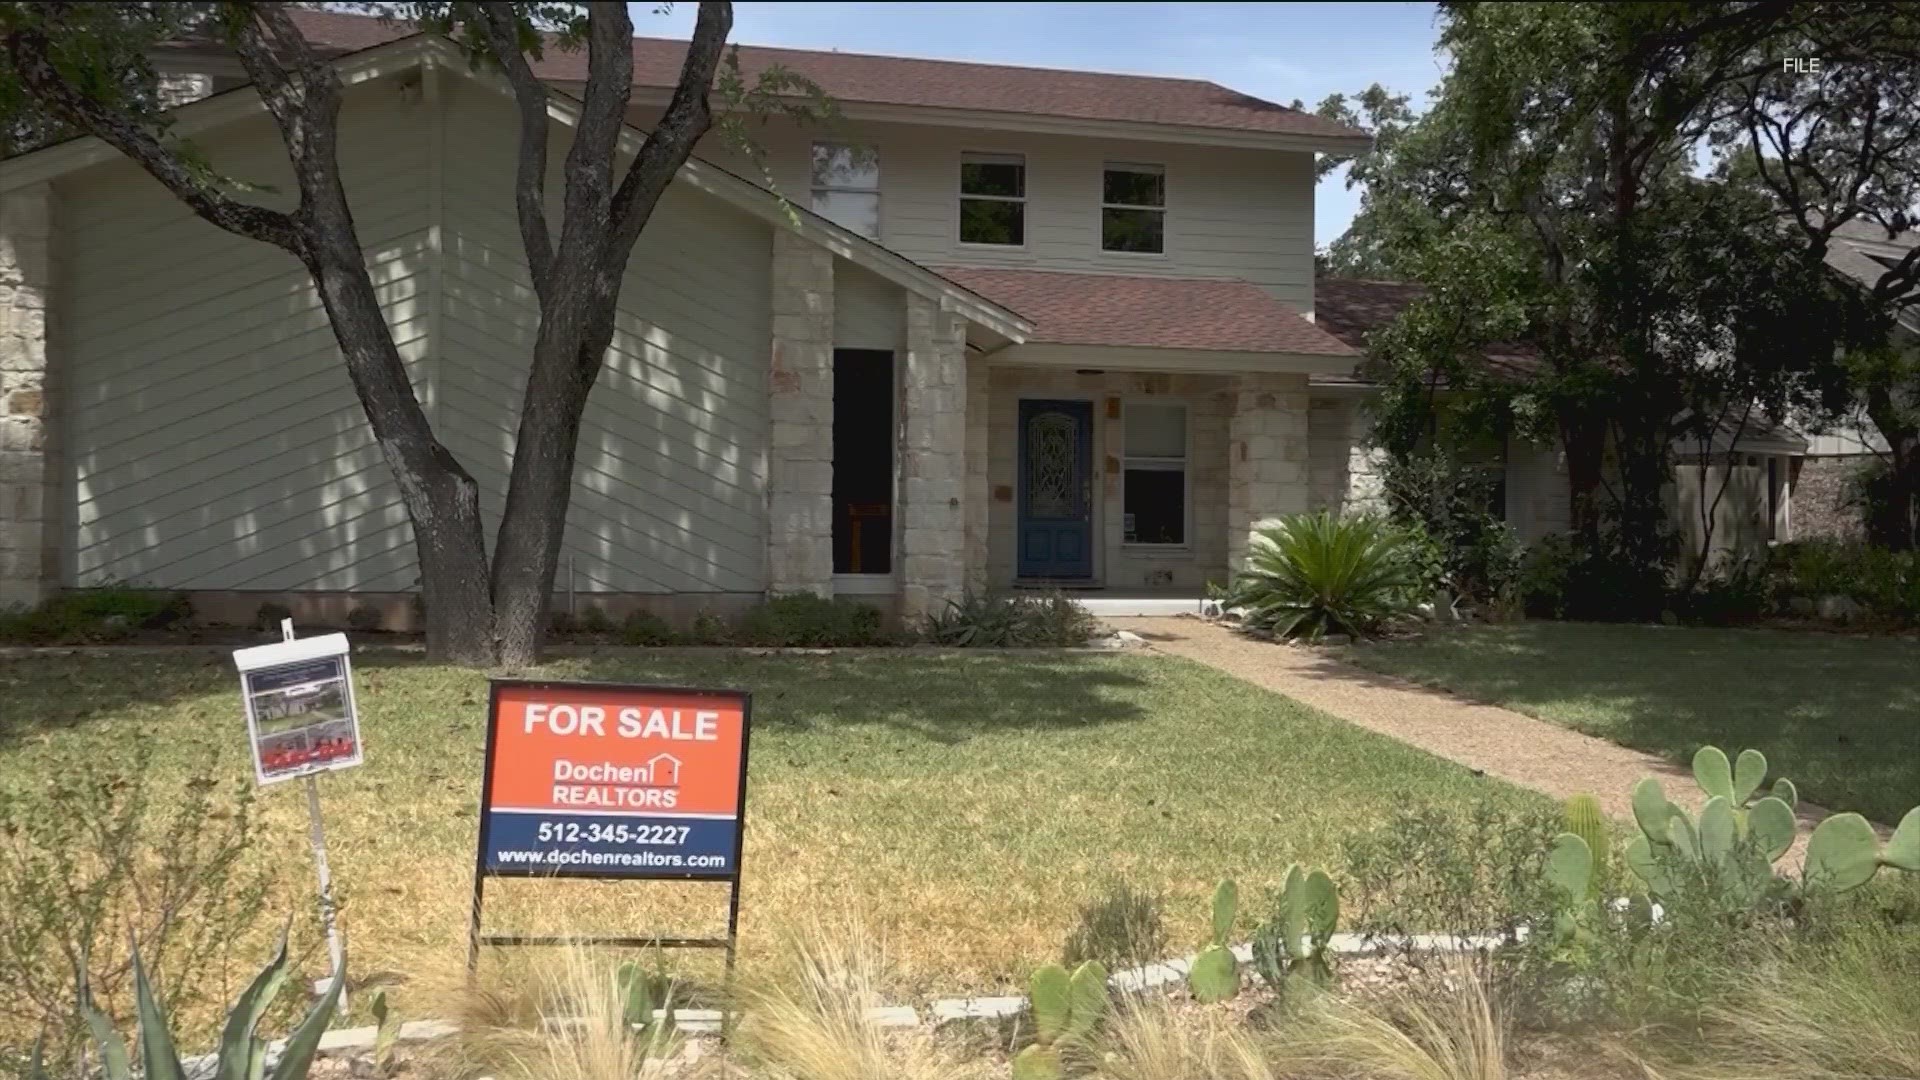 According to a new report from Zillow, the Lone Star State's housing market gained $328 billion last year.